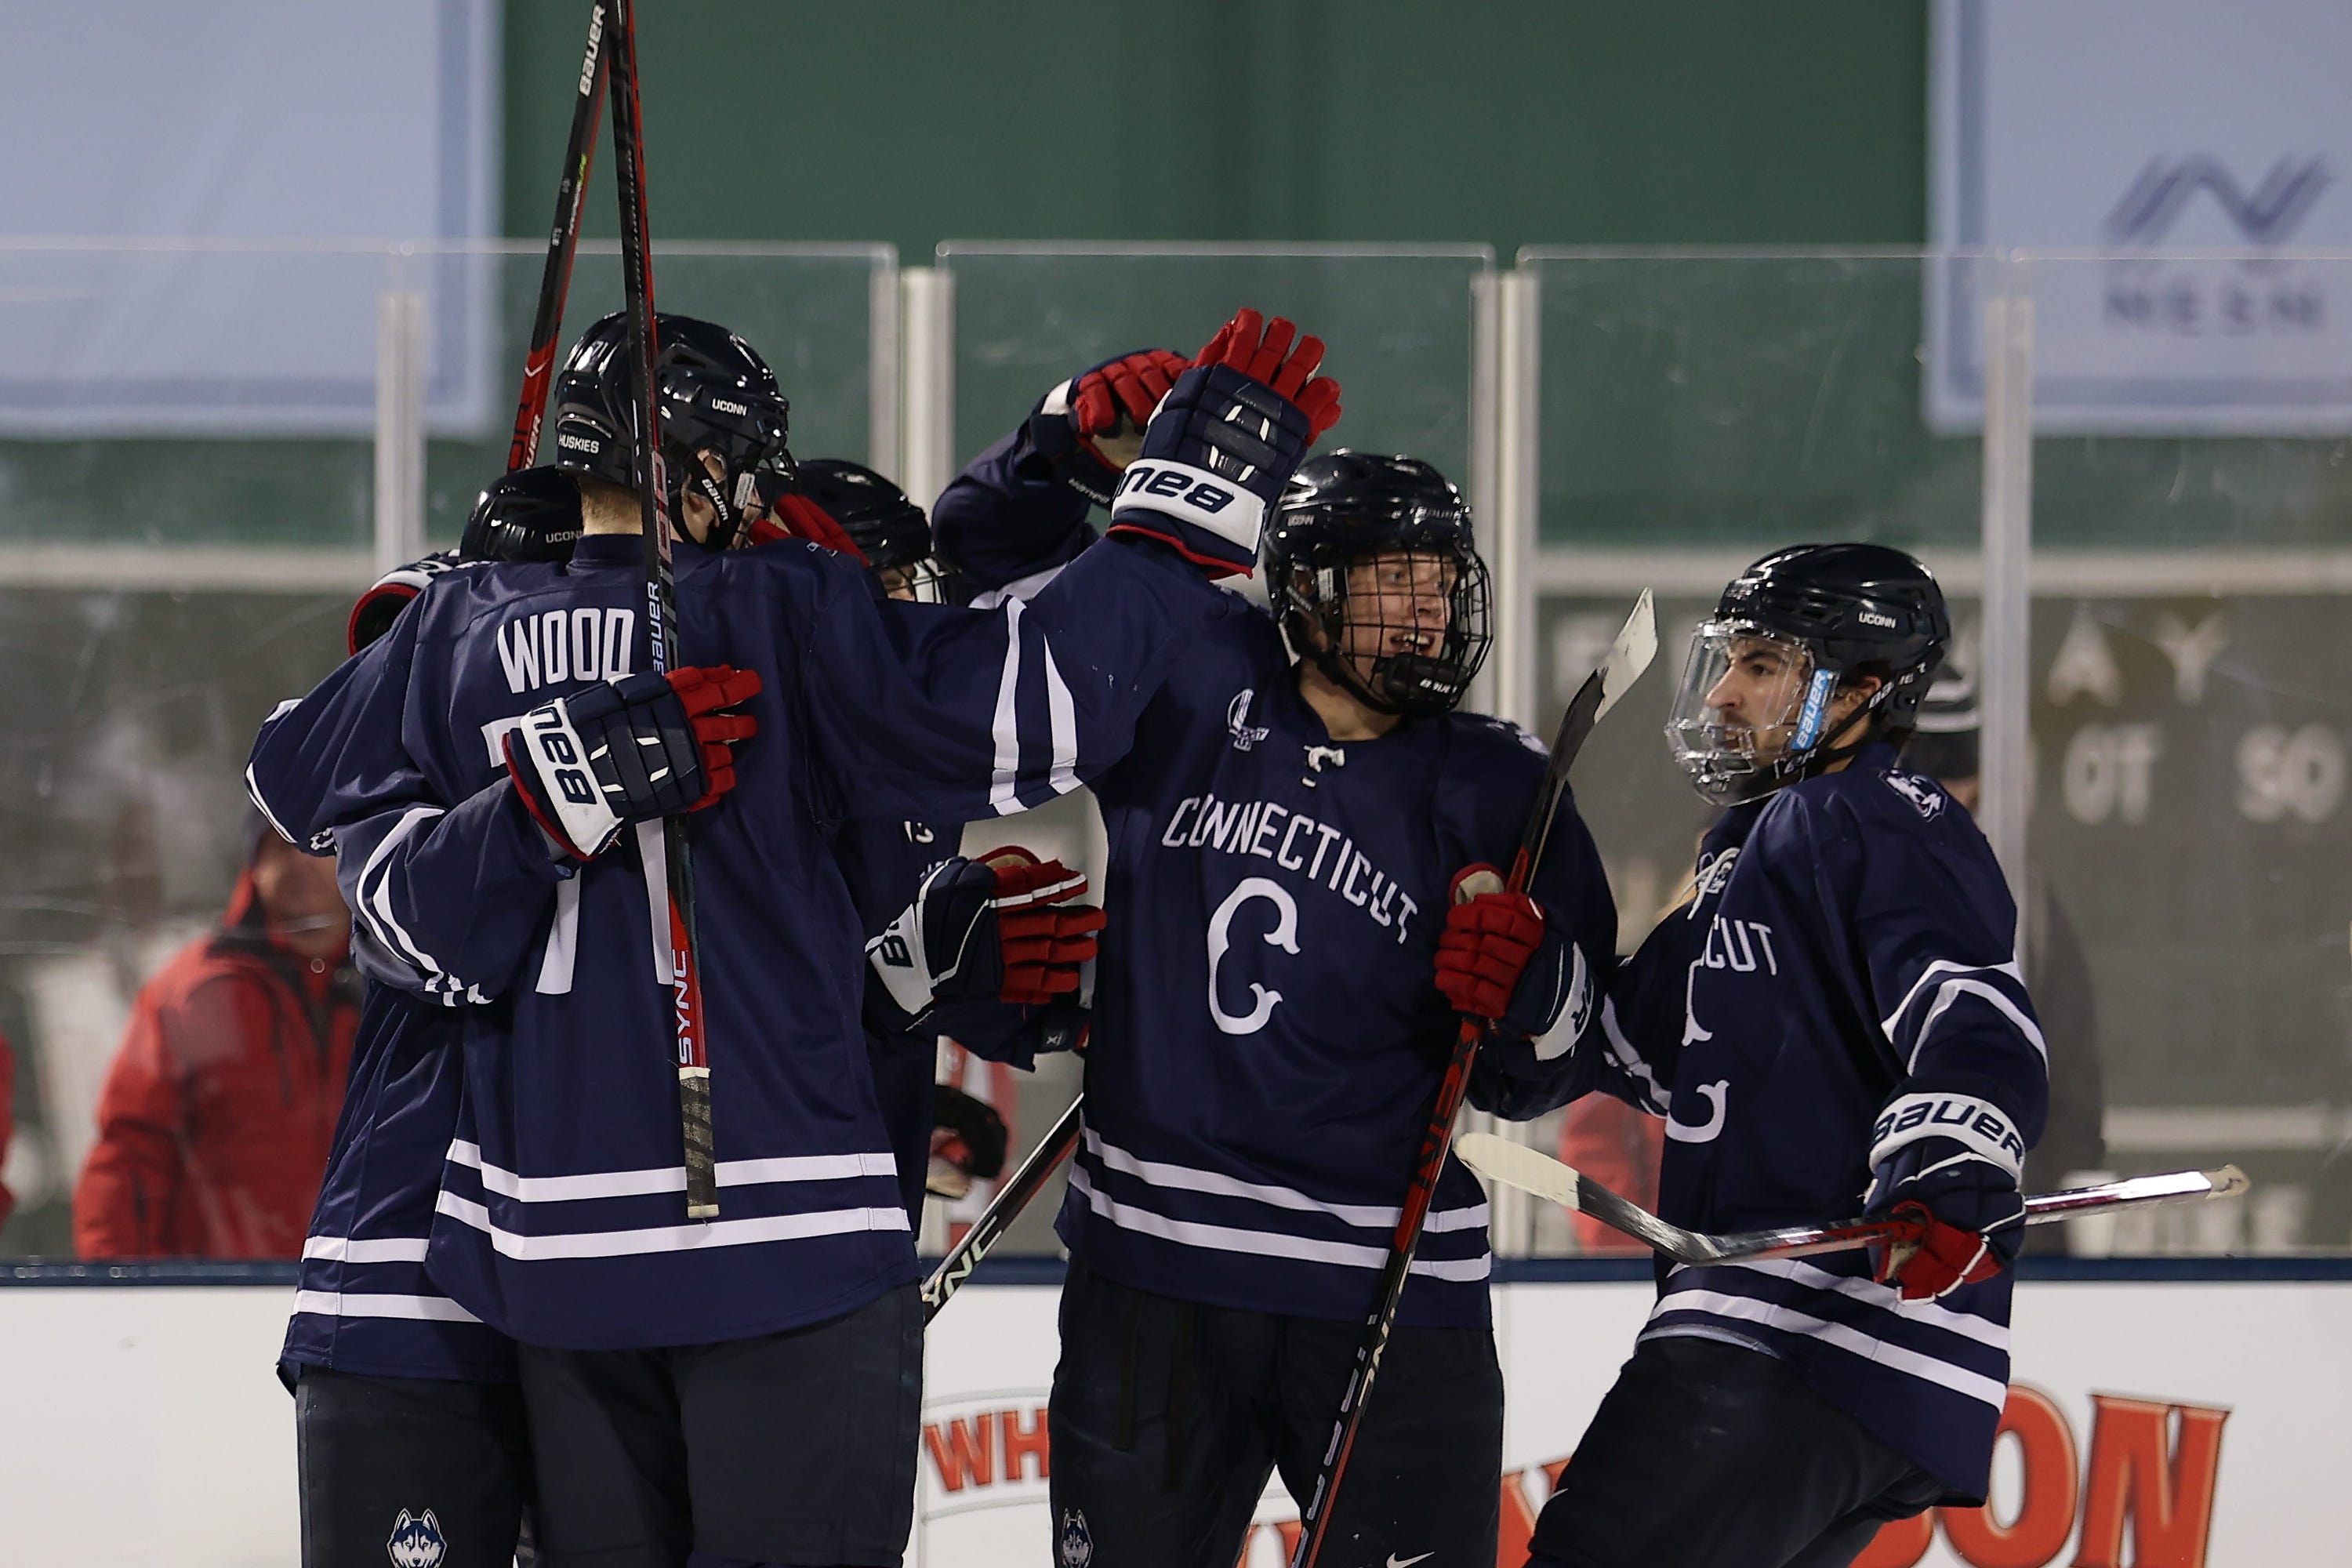 The Forecheck: The story behind UConn's 'Hook C' jerseys